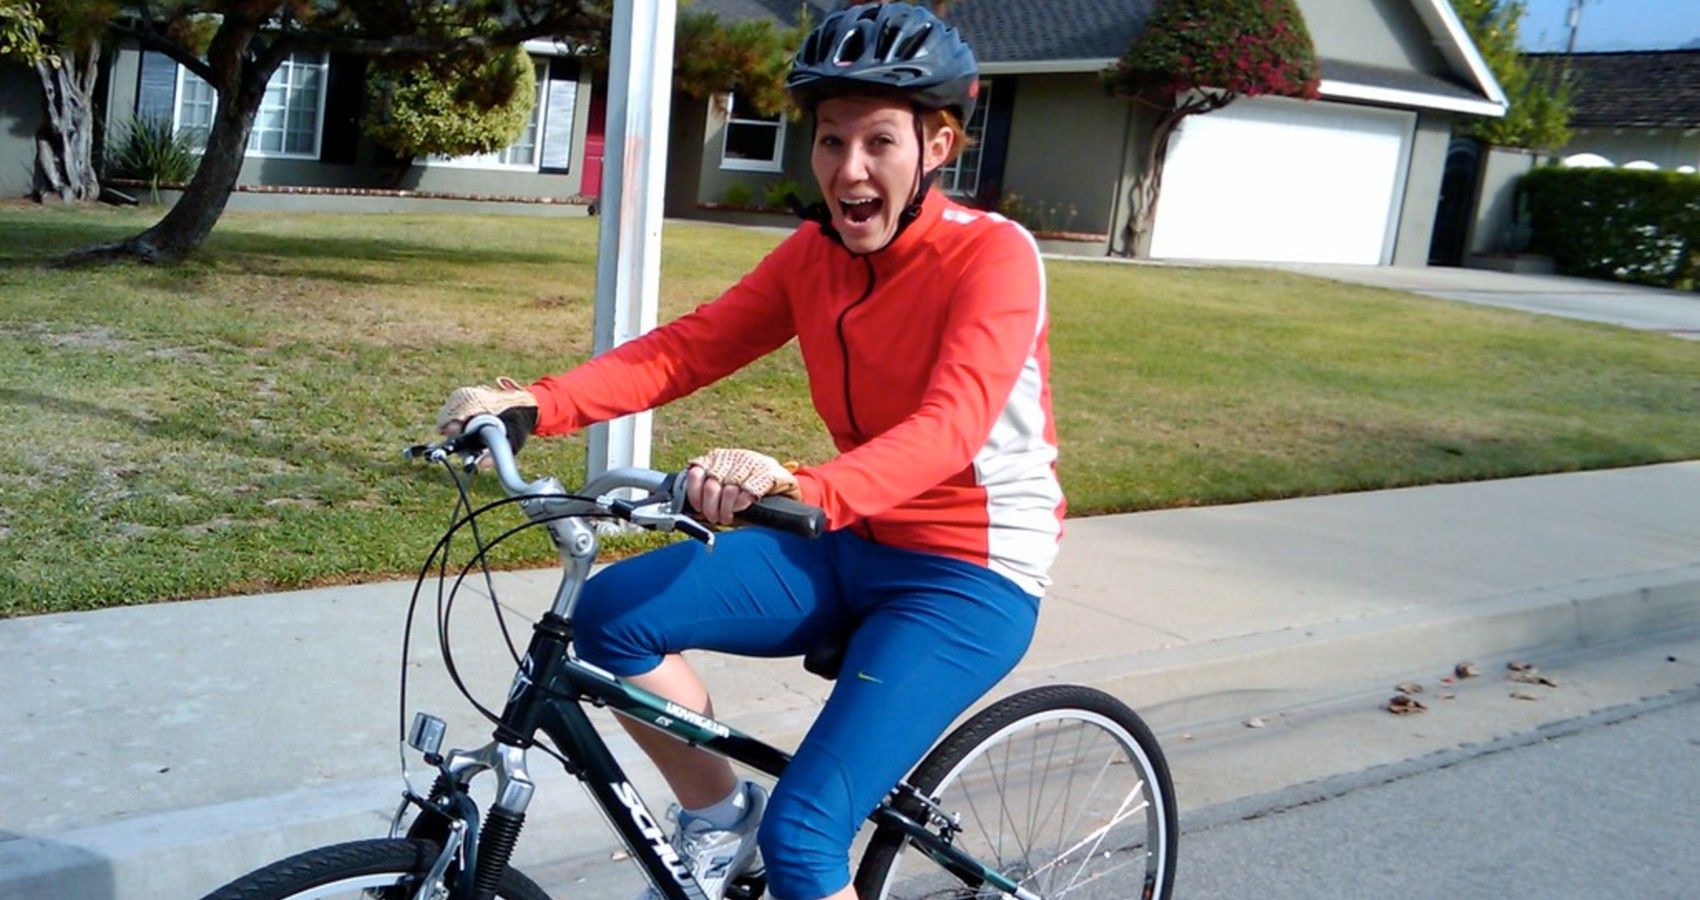 A woman riding a bike with a helmet on